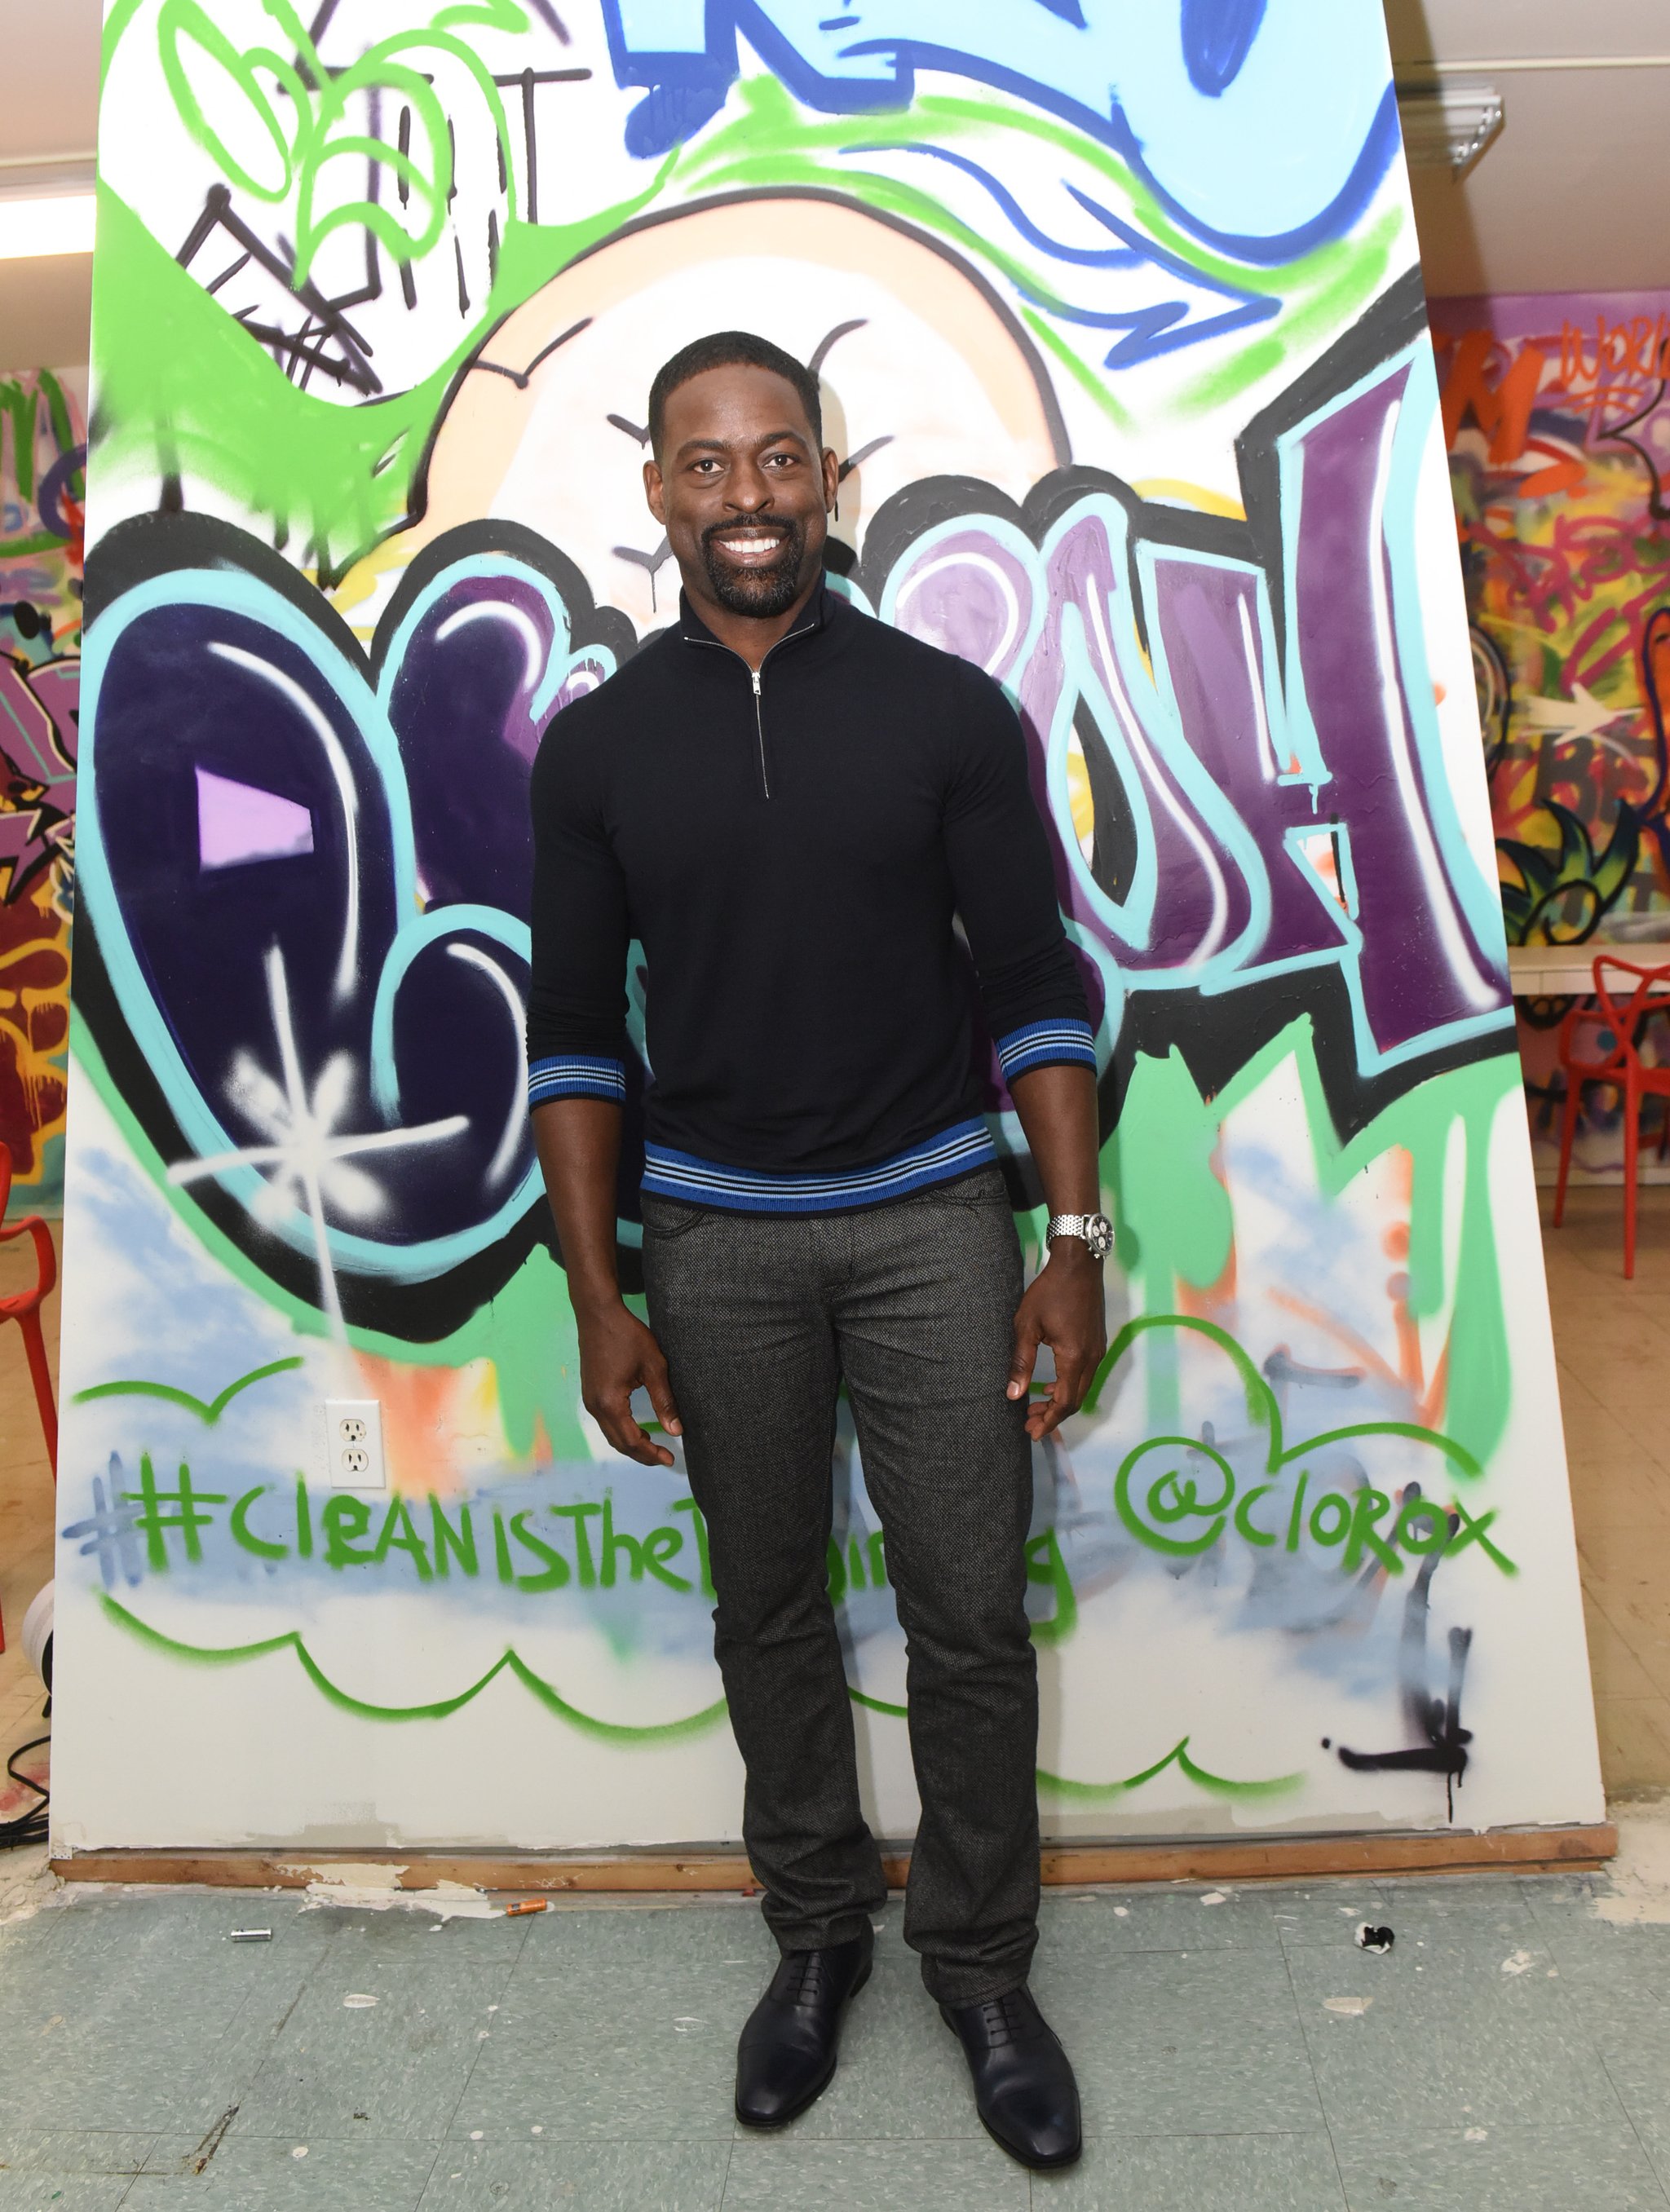 Award-winning actor Sterling K. Brown joins Clorox and Thrive Collective to celebrate the transformative power of clean at a new Youth Opportunity Hub in Harlem, New York, Tuesday, Feb. 27, 2018. The space was cleaned with a grant from Clorox and the help of 250 community volunteers to create new possibilities for youth as an arts hub and mentoring center. (Photo by Diane Bondareff/Invision for Clorox/AP Images) - Sterling K. Brown This Is Us And Black Panther Interview